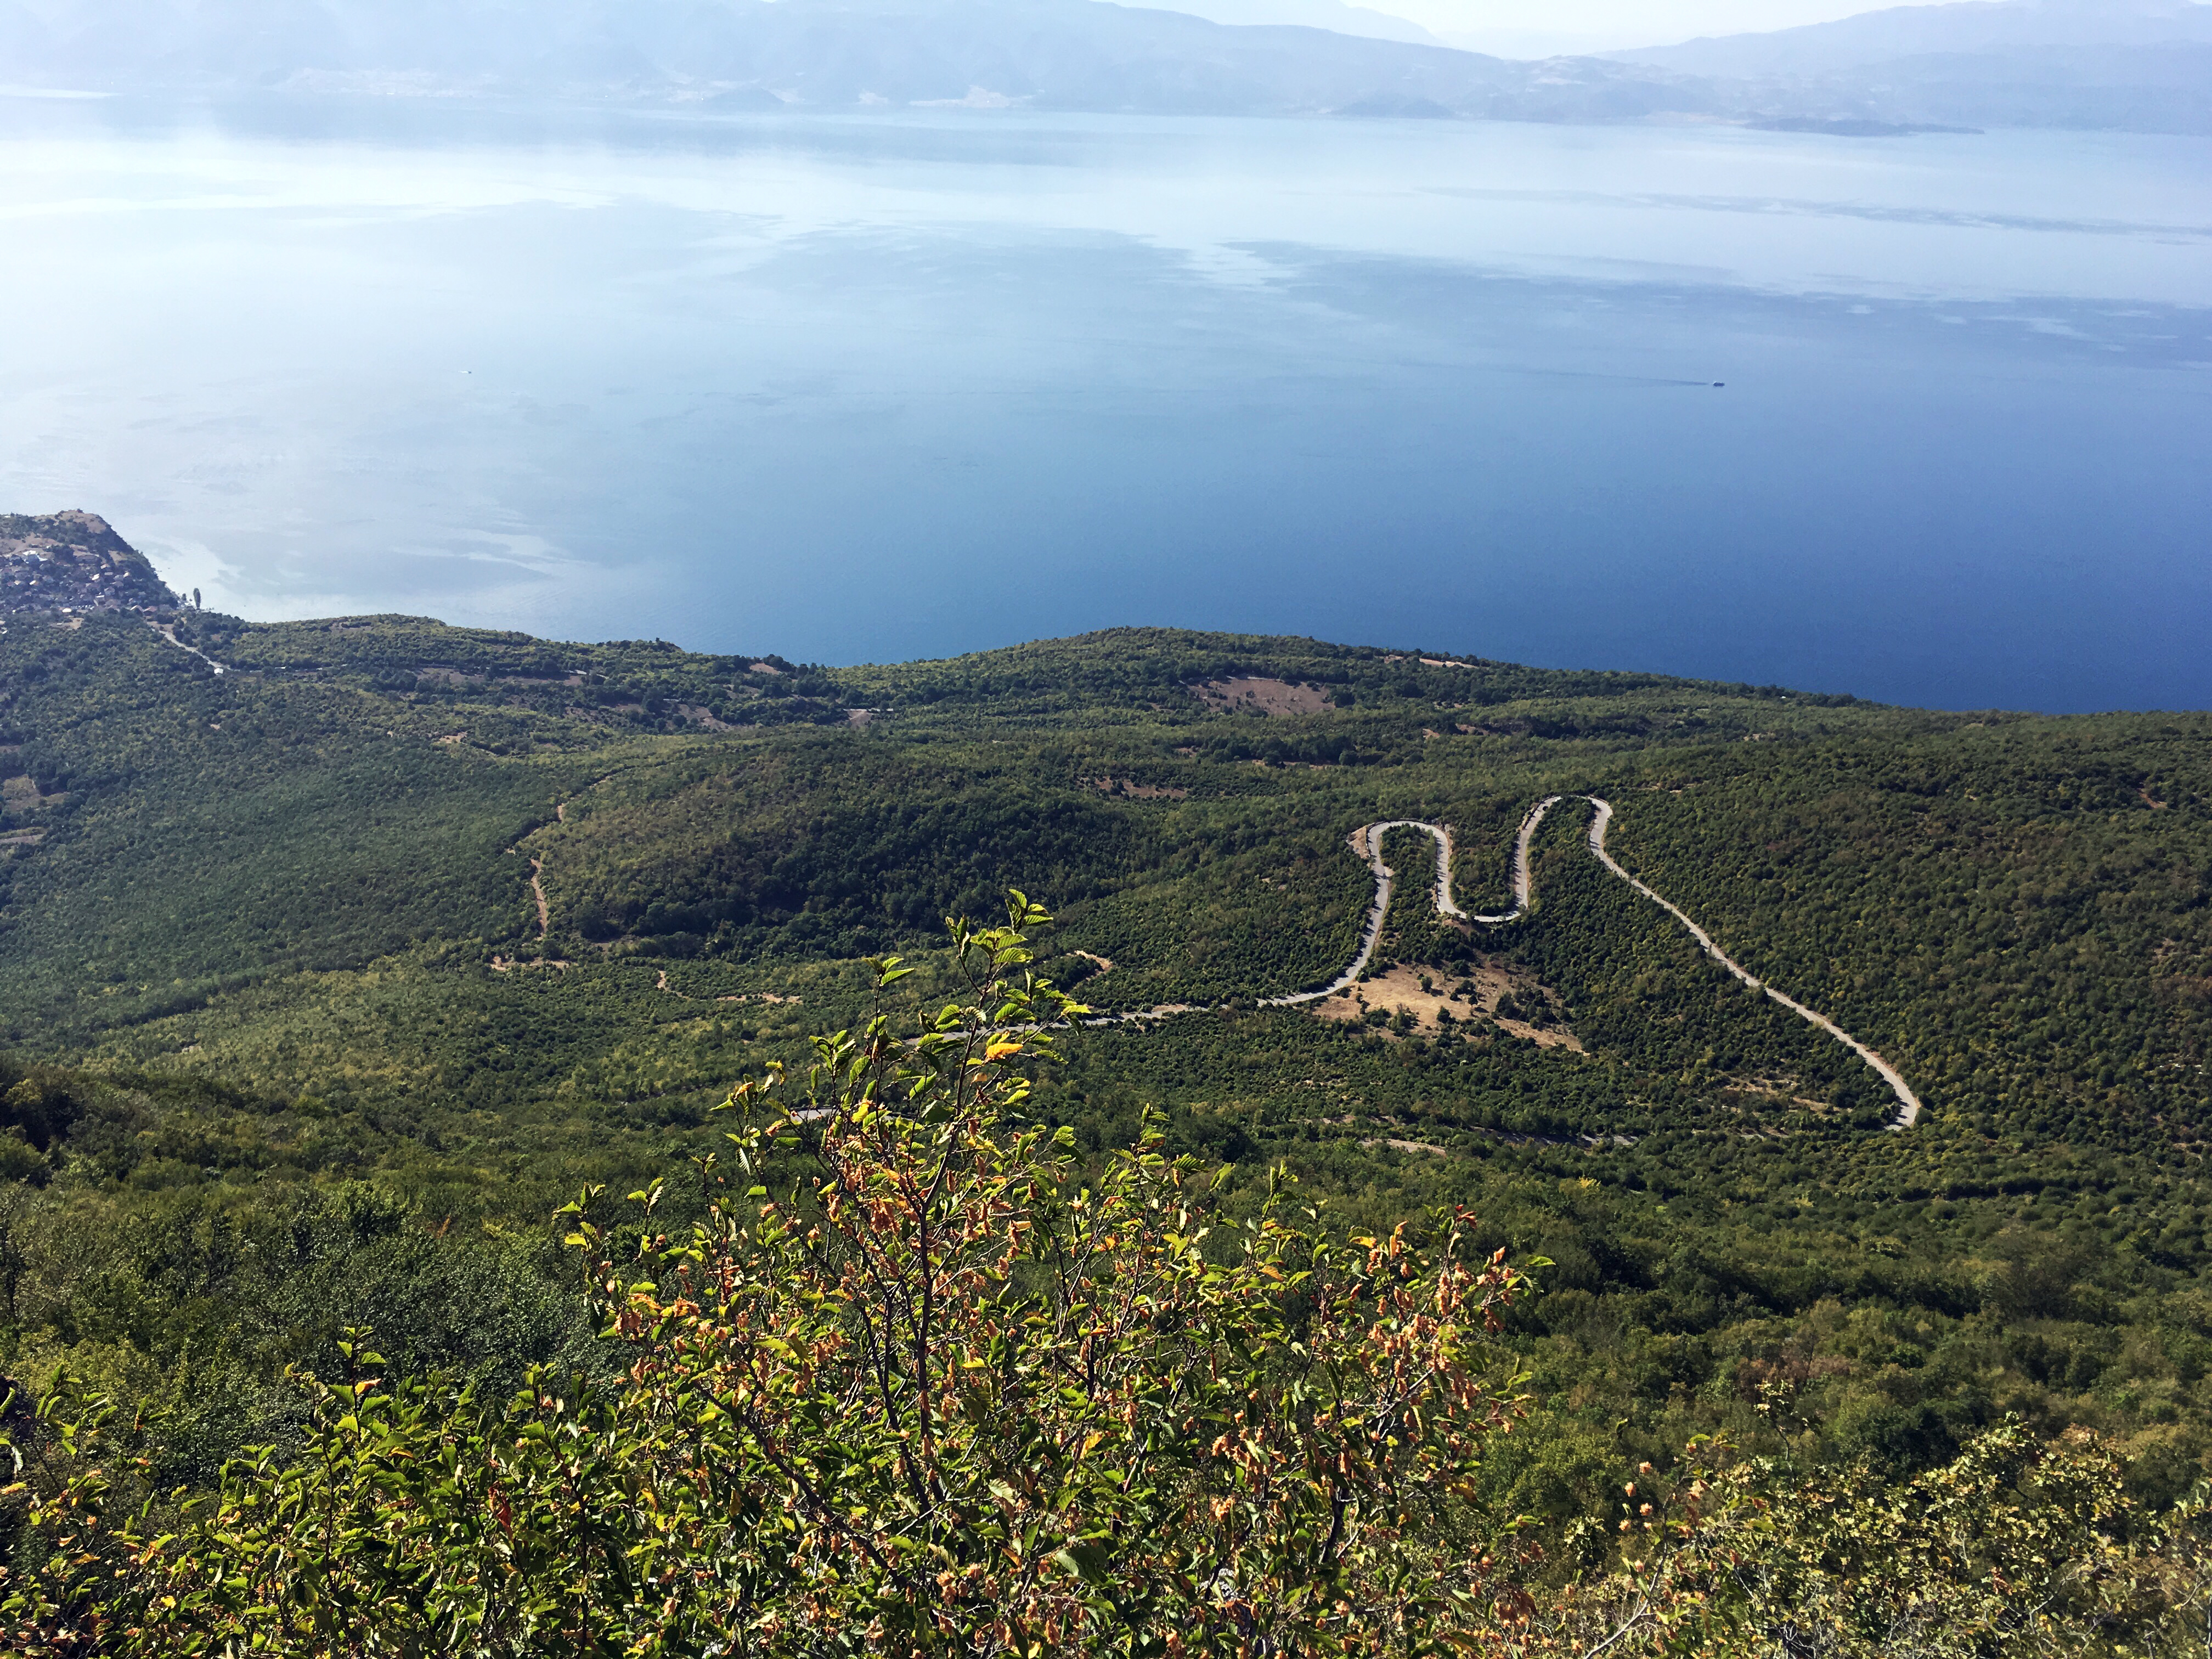 File:Snake road in Galicica National Park.jpg - Wikimedia Commons